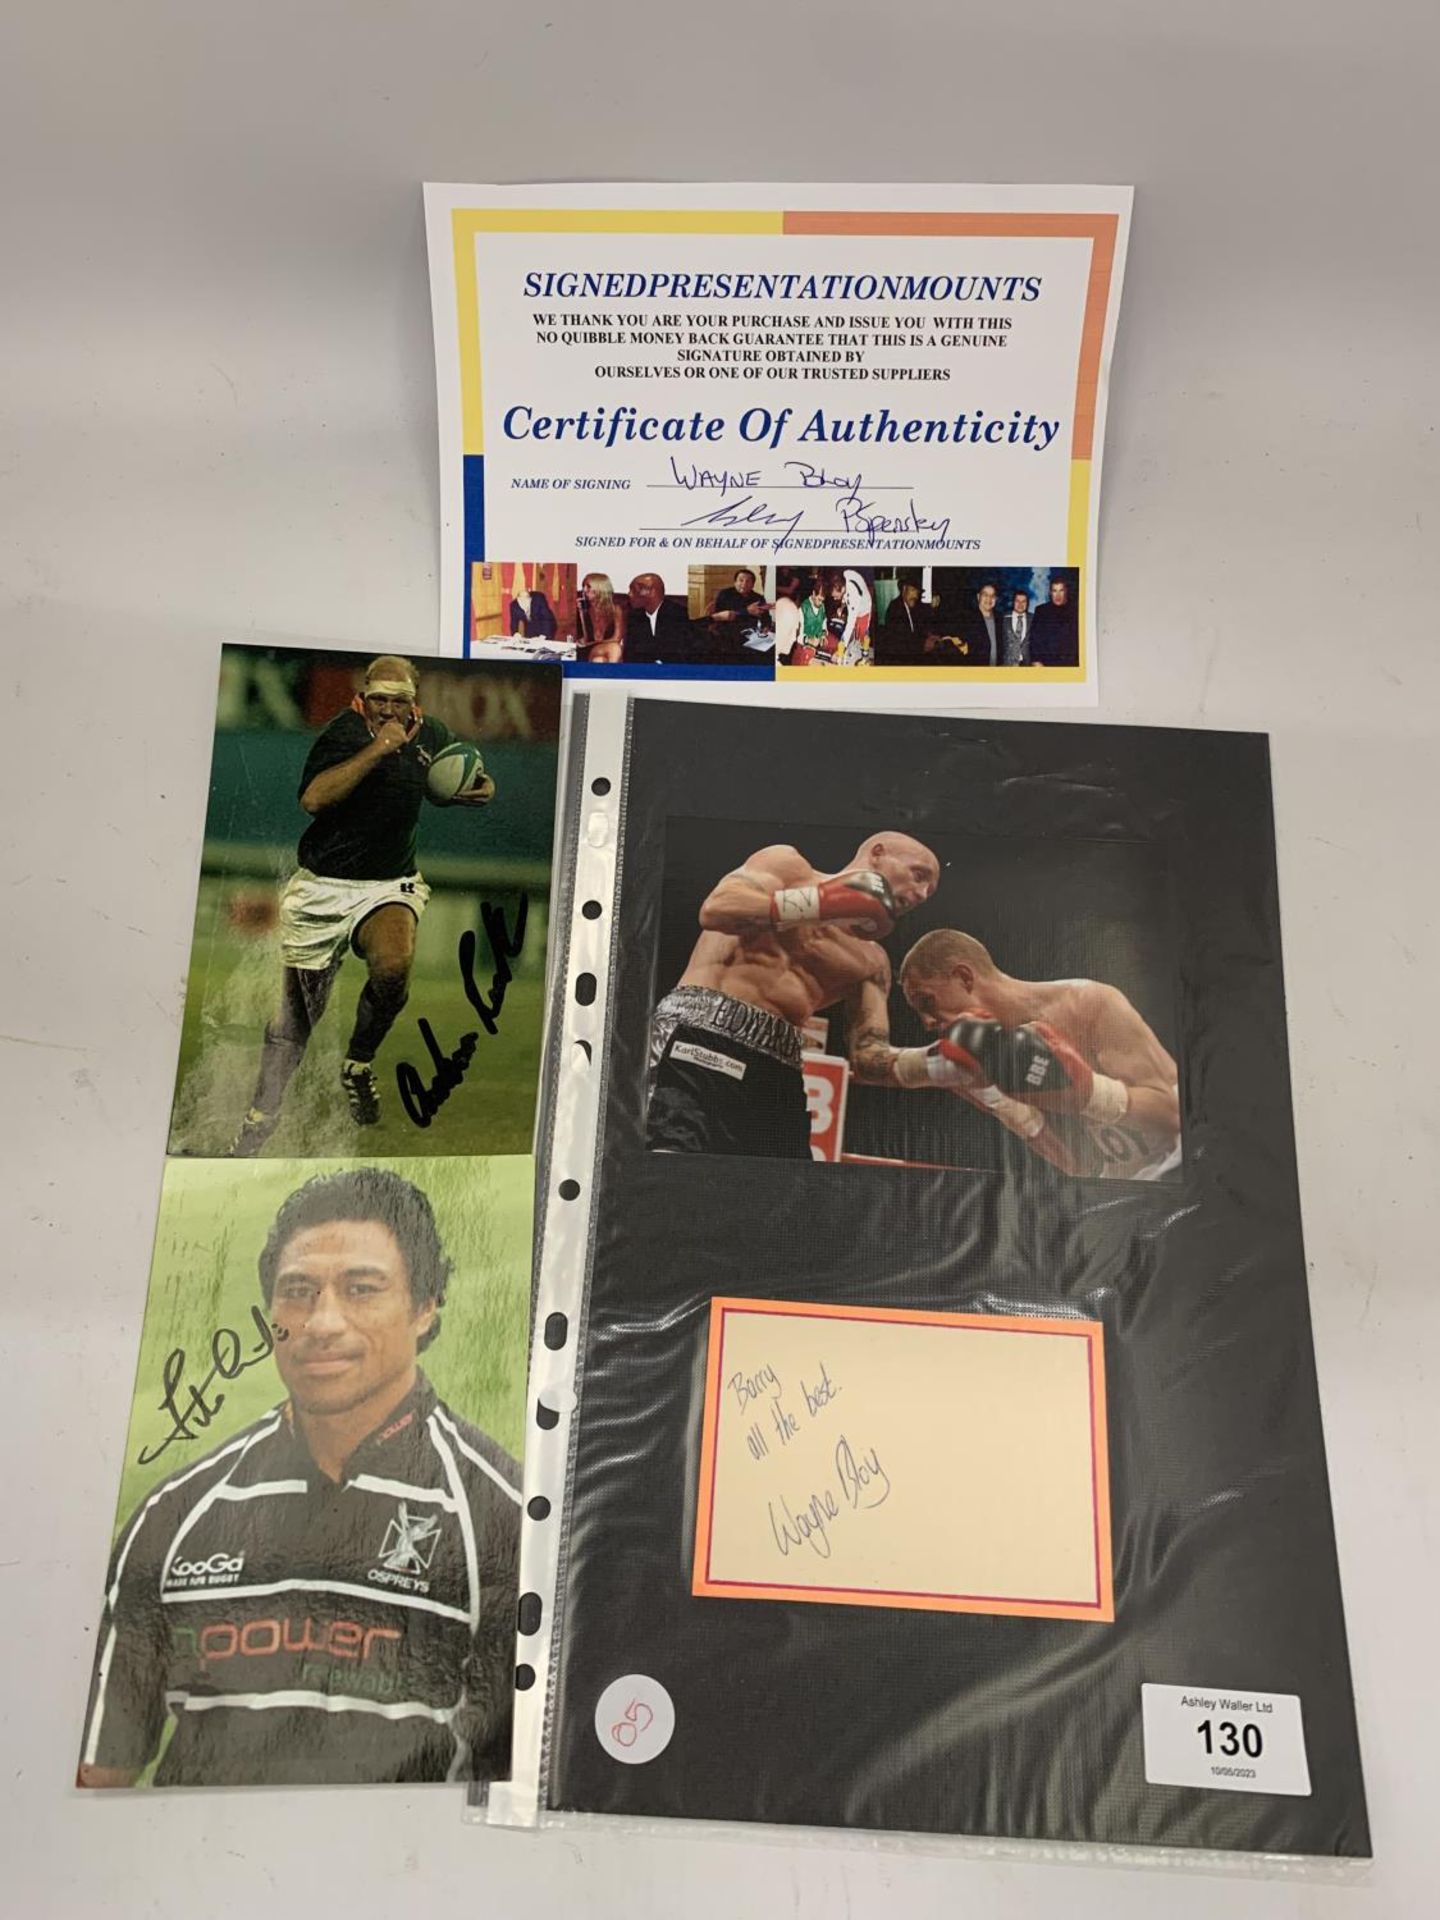 A SIGNED PHOTO OF CHAMPION BOXER WAYNE BLOY WITH CERTIFICATE OF AUTHENTICITY, AND RUGBY UNION - Image 3 of 4